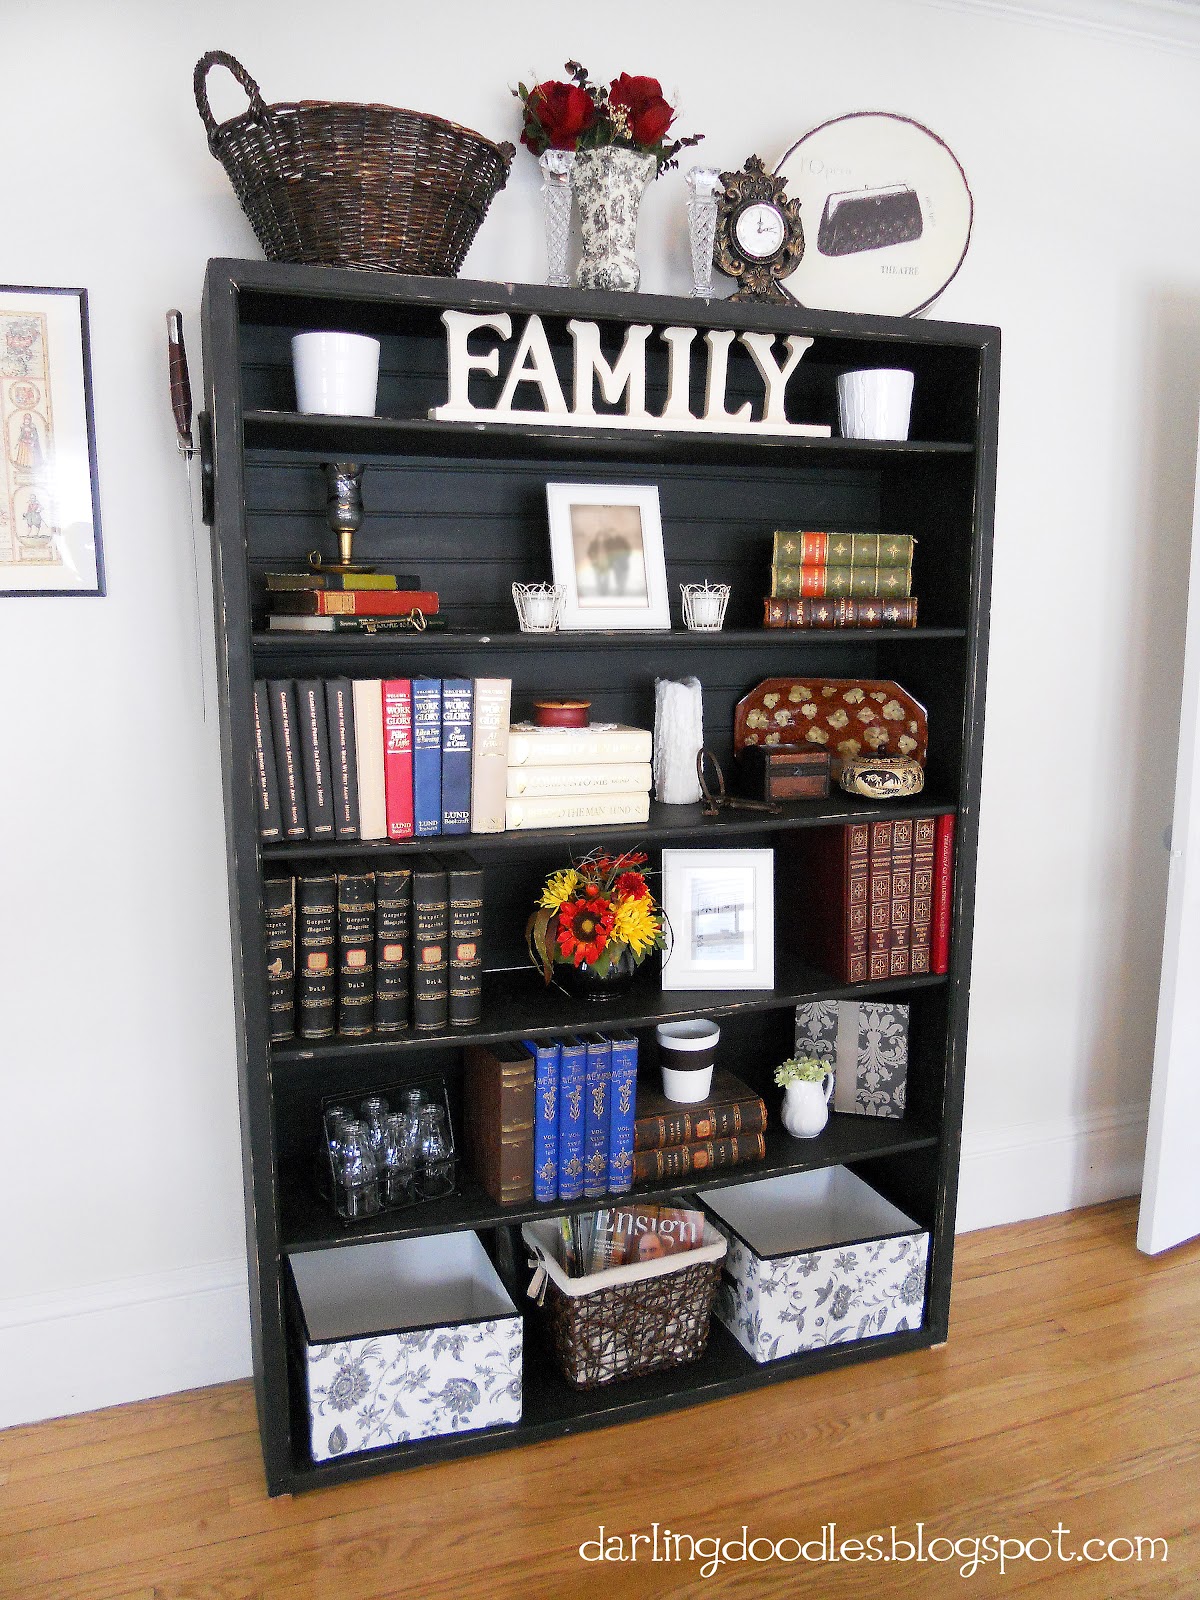 Showcase the Bookcase & Other Tips - Darling Doodles | Darling Doodles